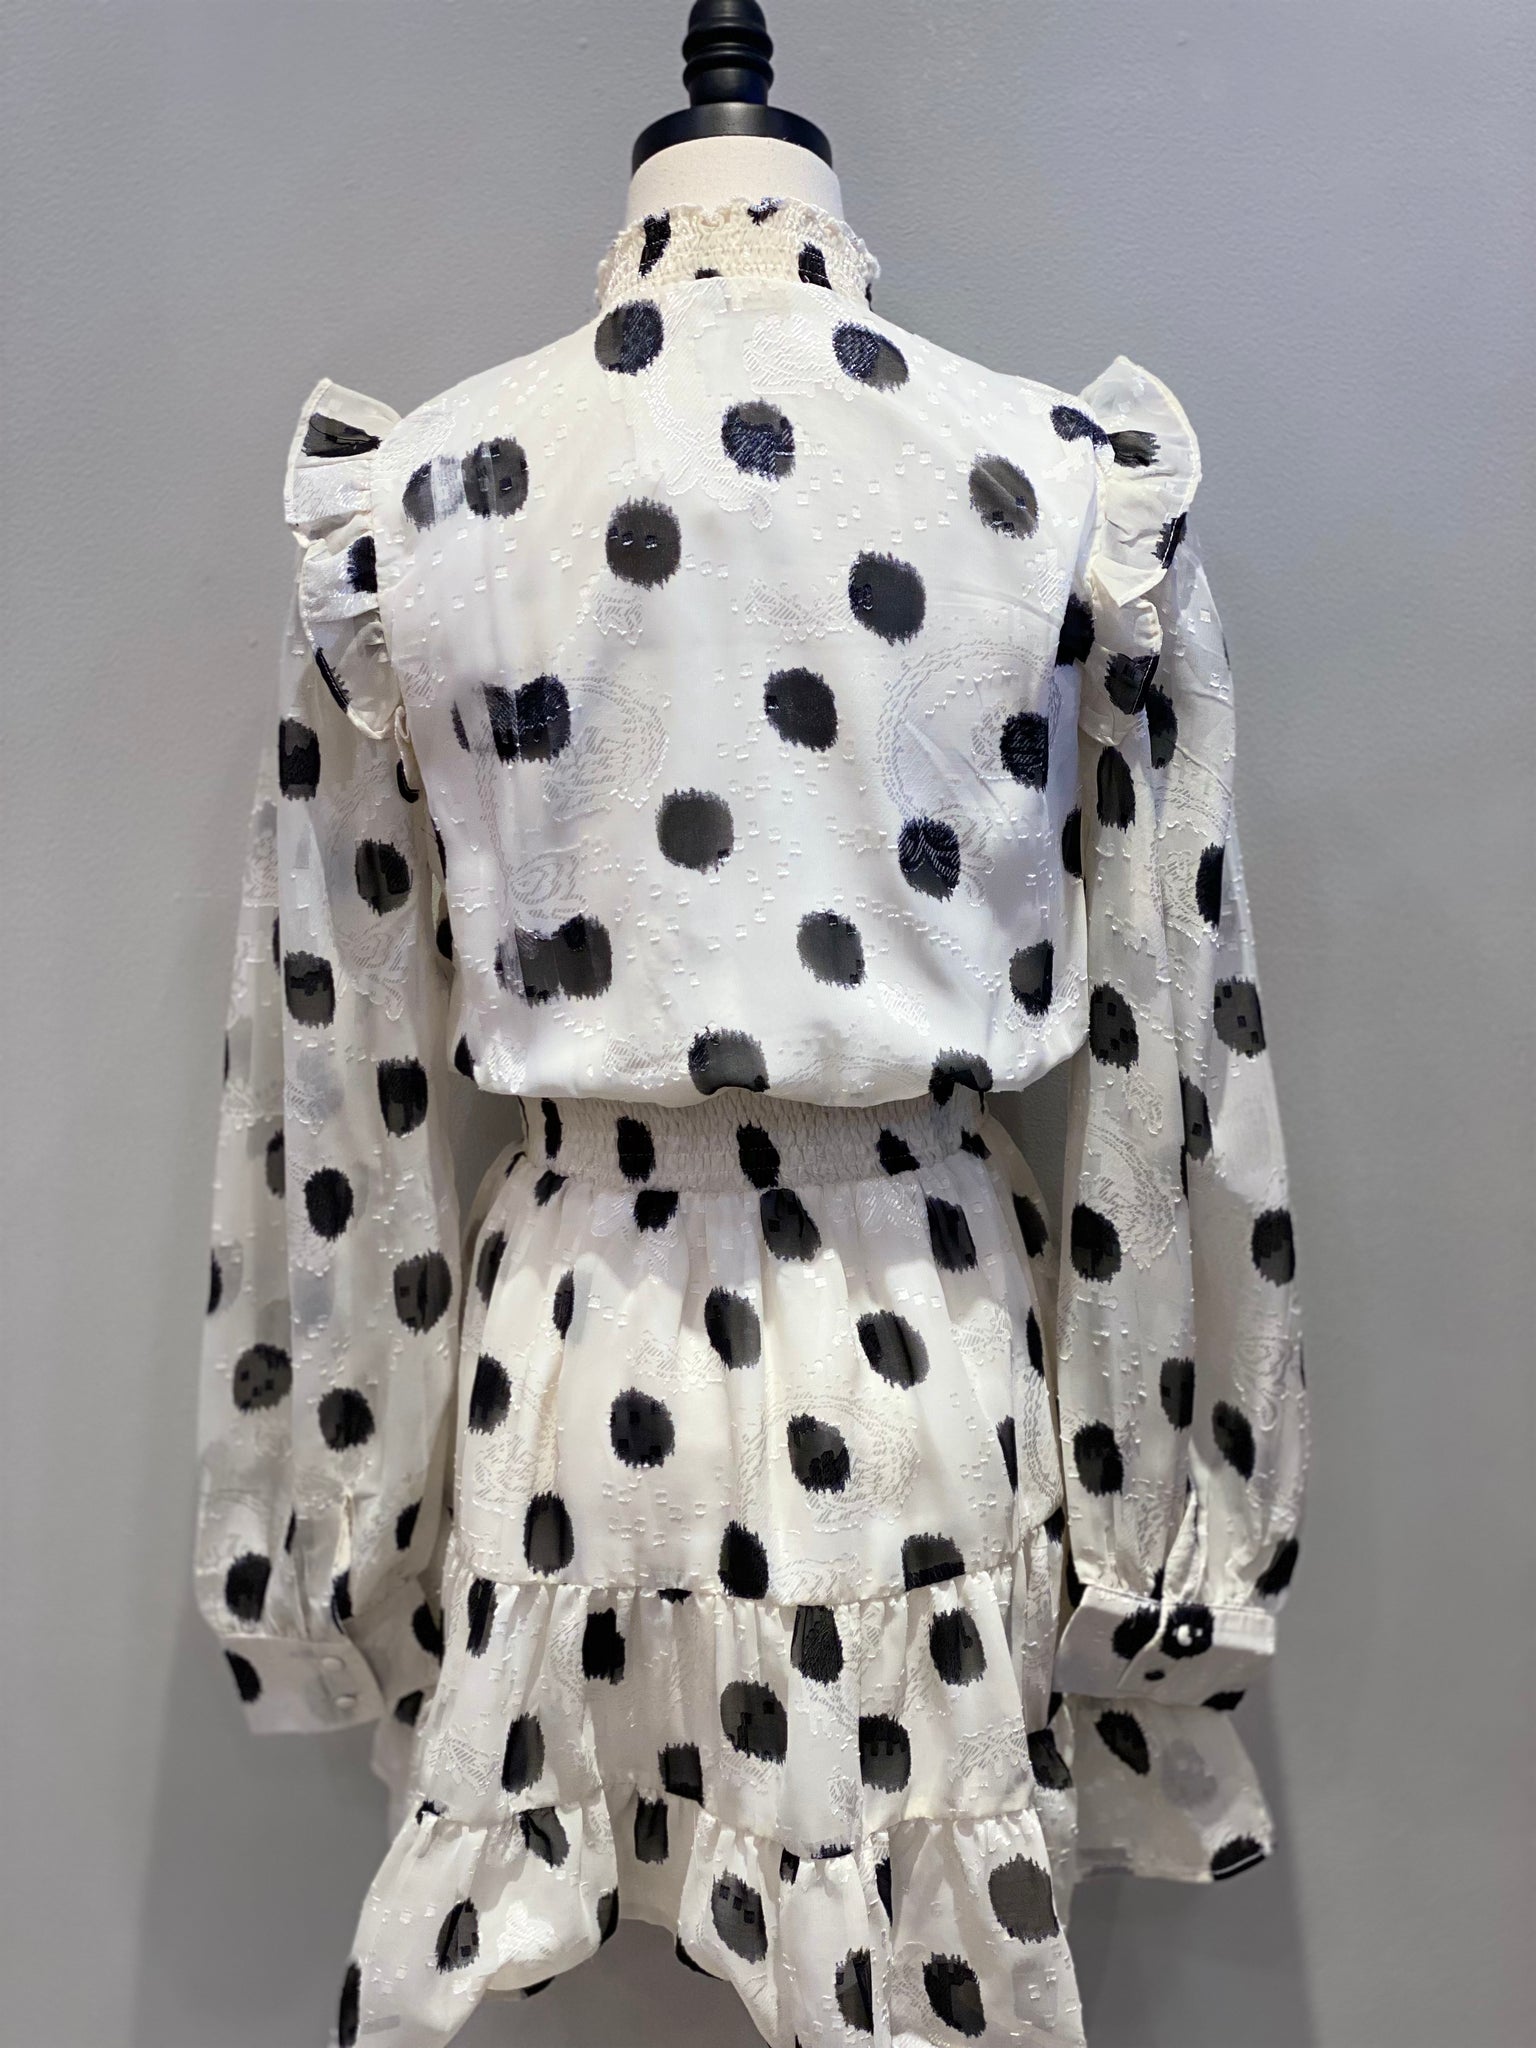 Not Your Typical Polka Dot Dress